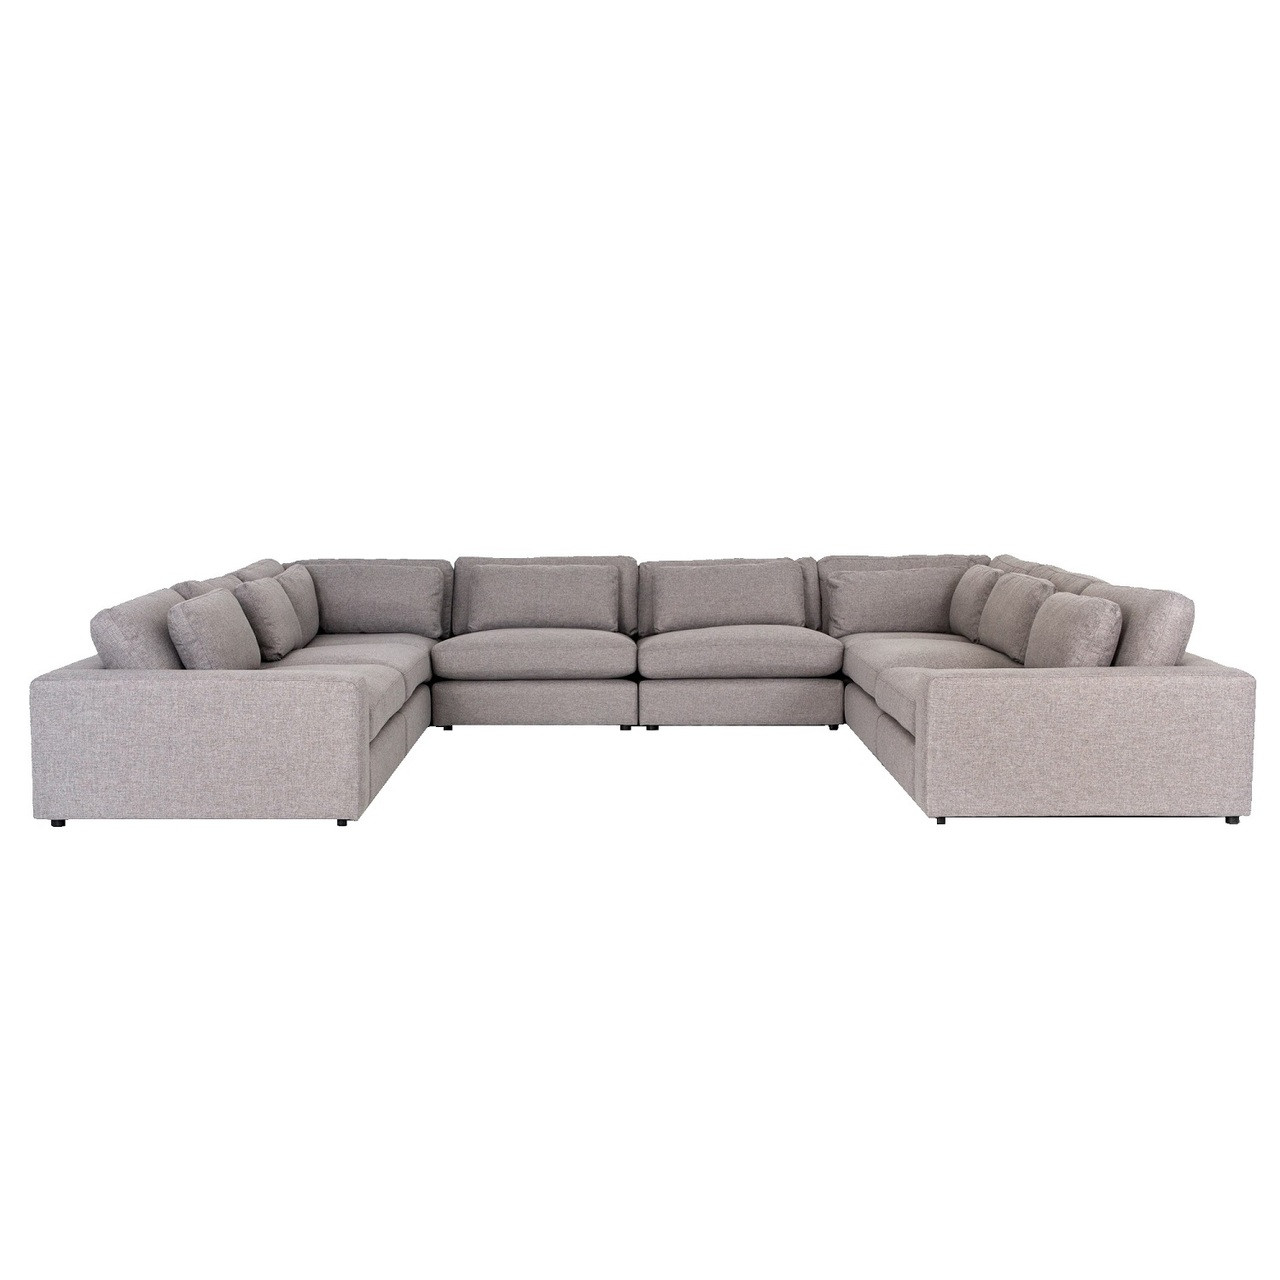 Bloor Contemporary Gray Fabric 8 Piece U Shaped Sectional Sofa 170